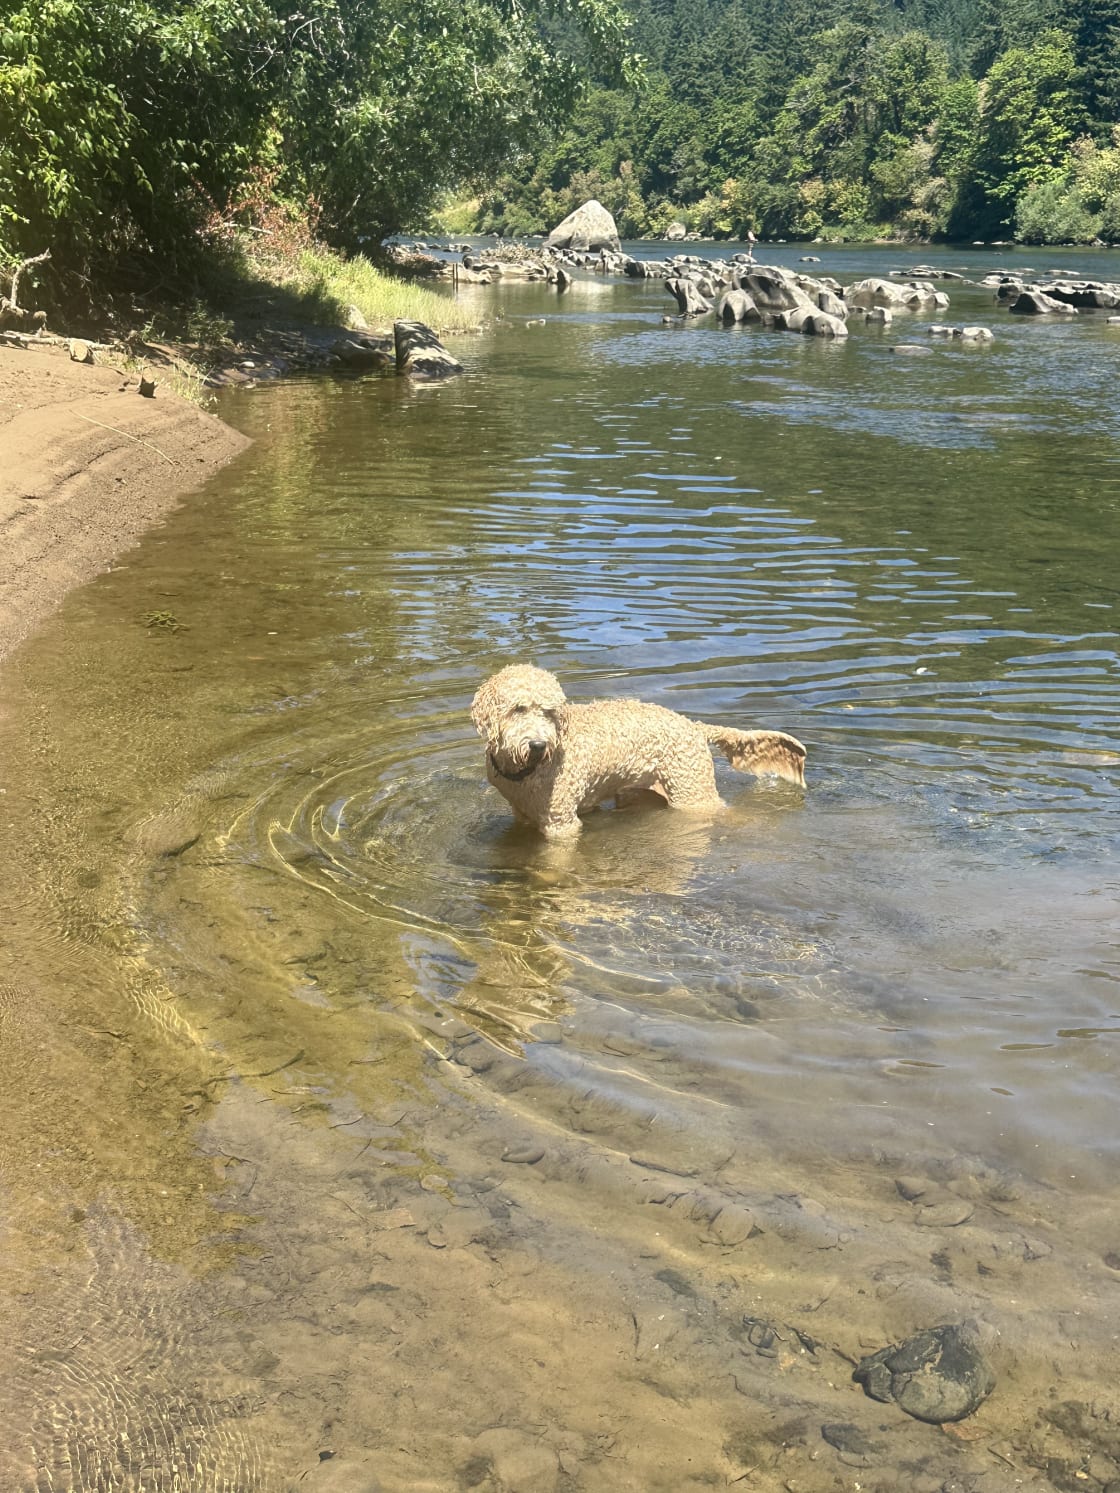 Great swimming holes for the kids and furry kids as well 